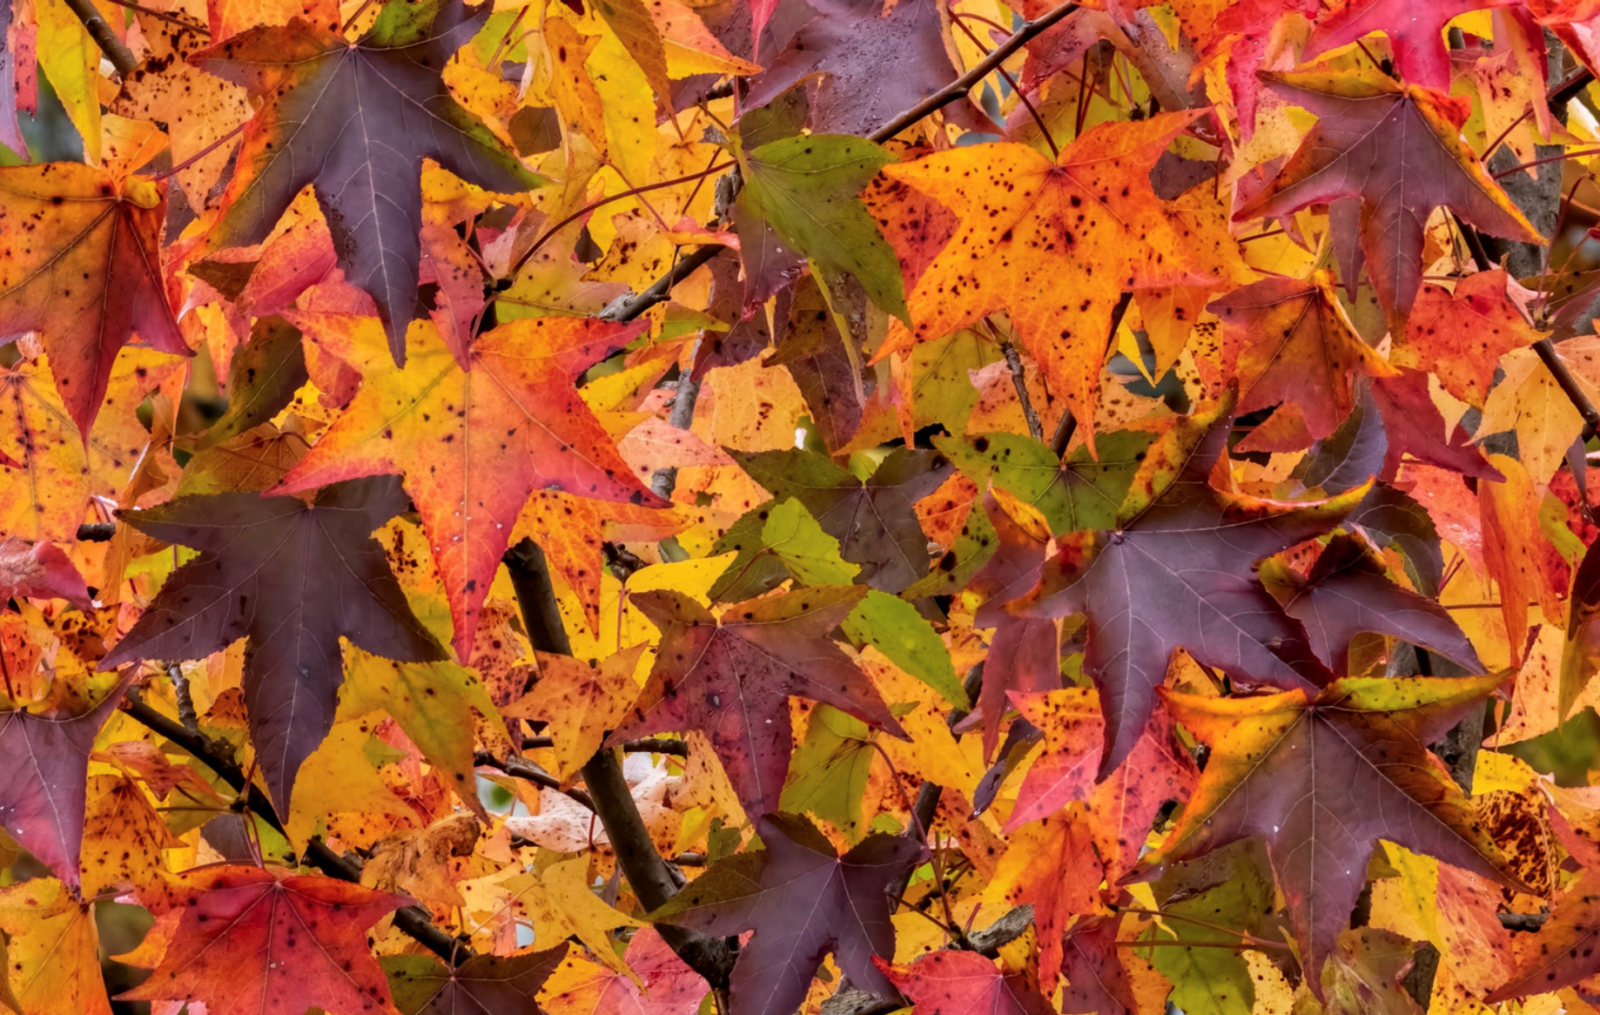 Pro-Tips for Leaving the Leaves - The National Wildlife Federation Blog